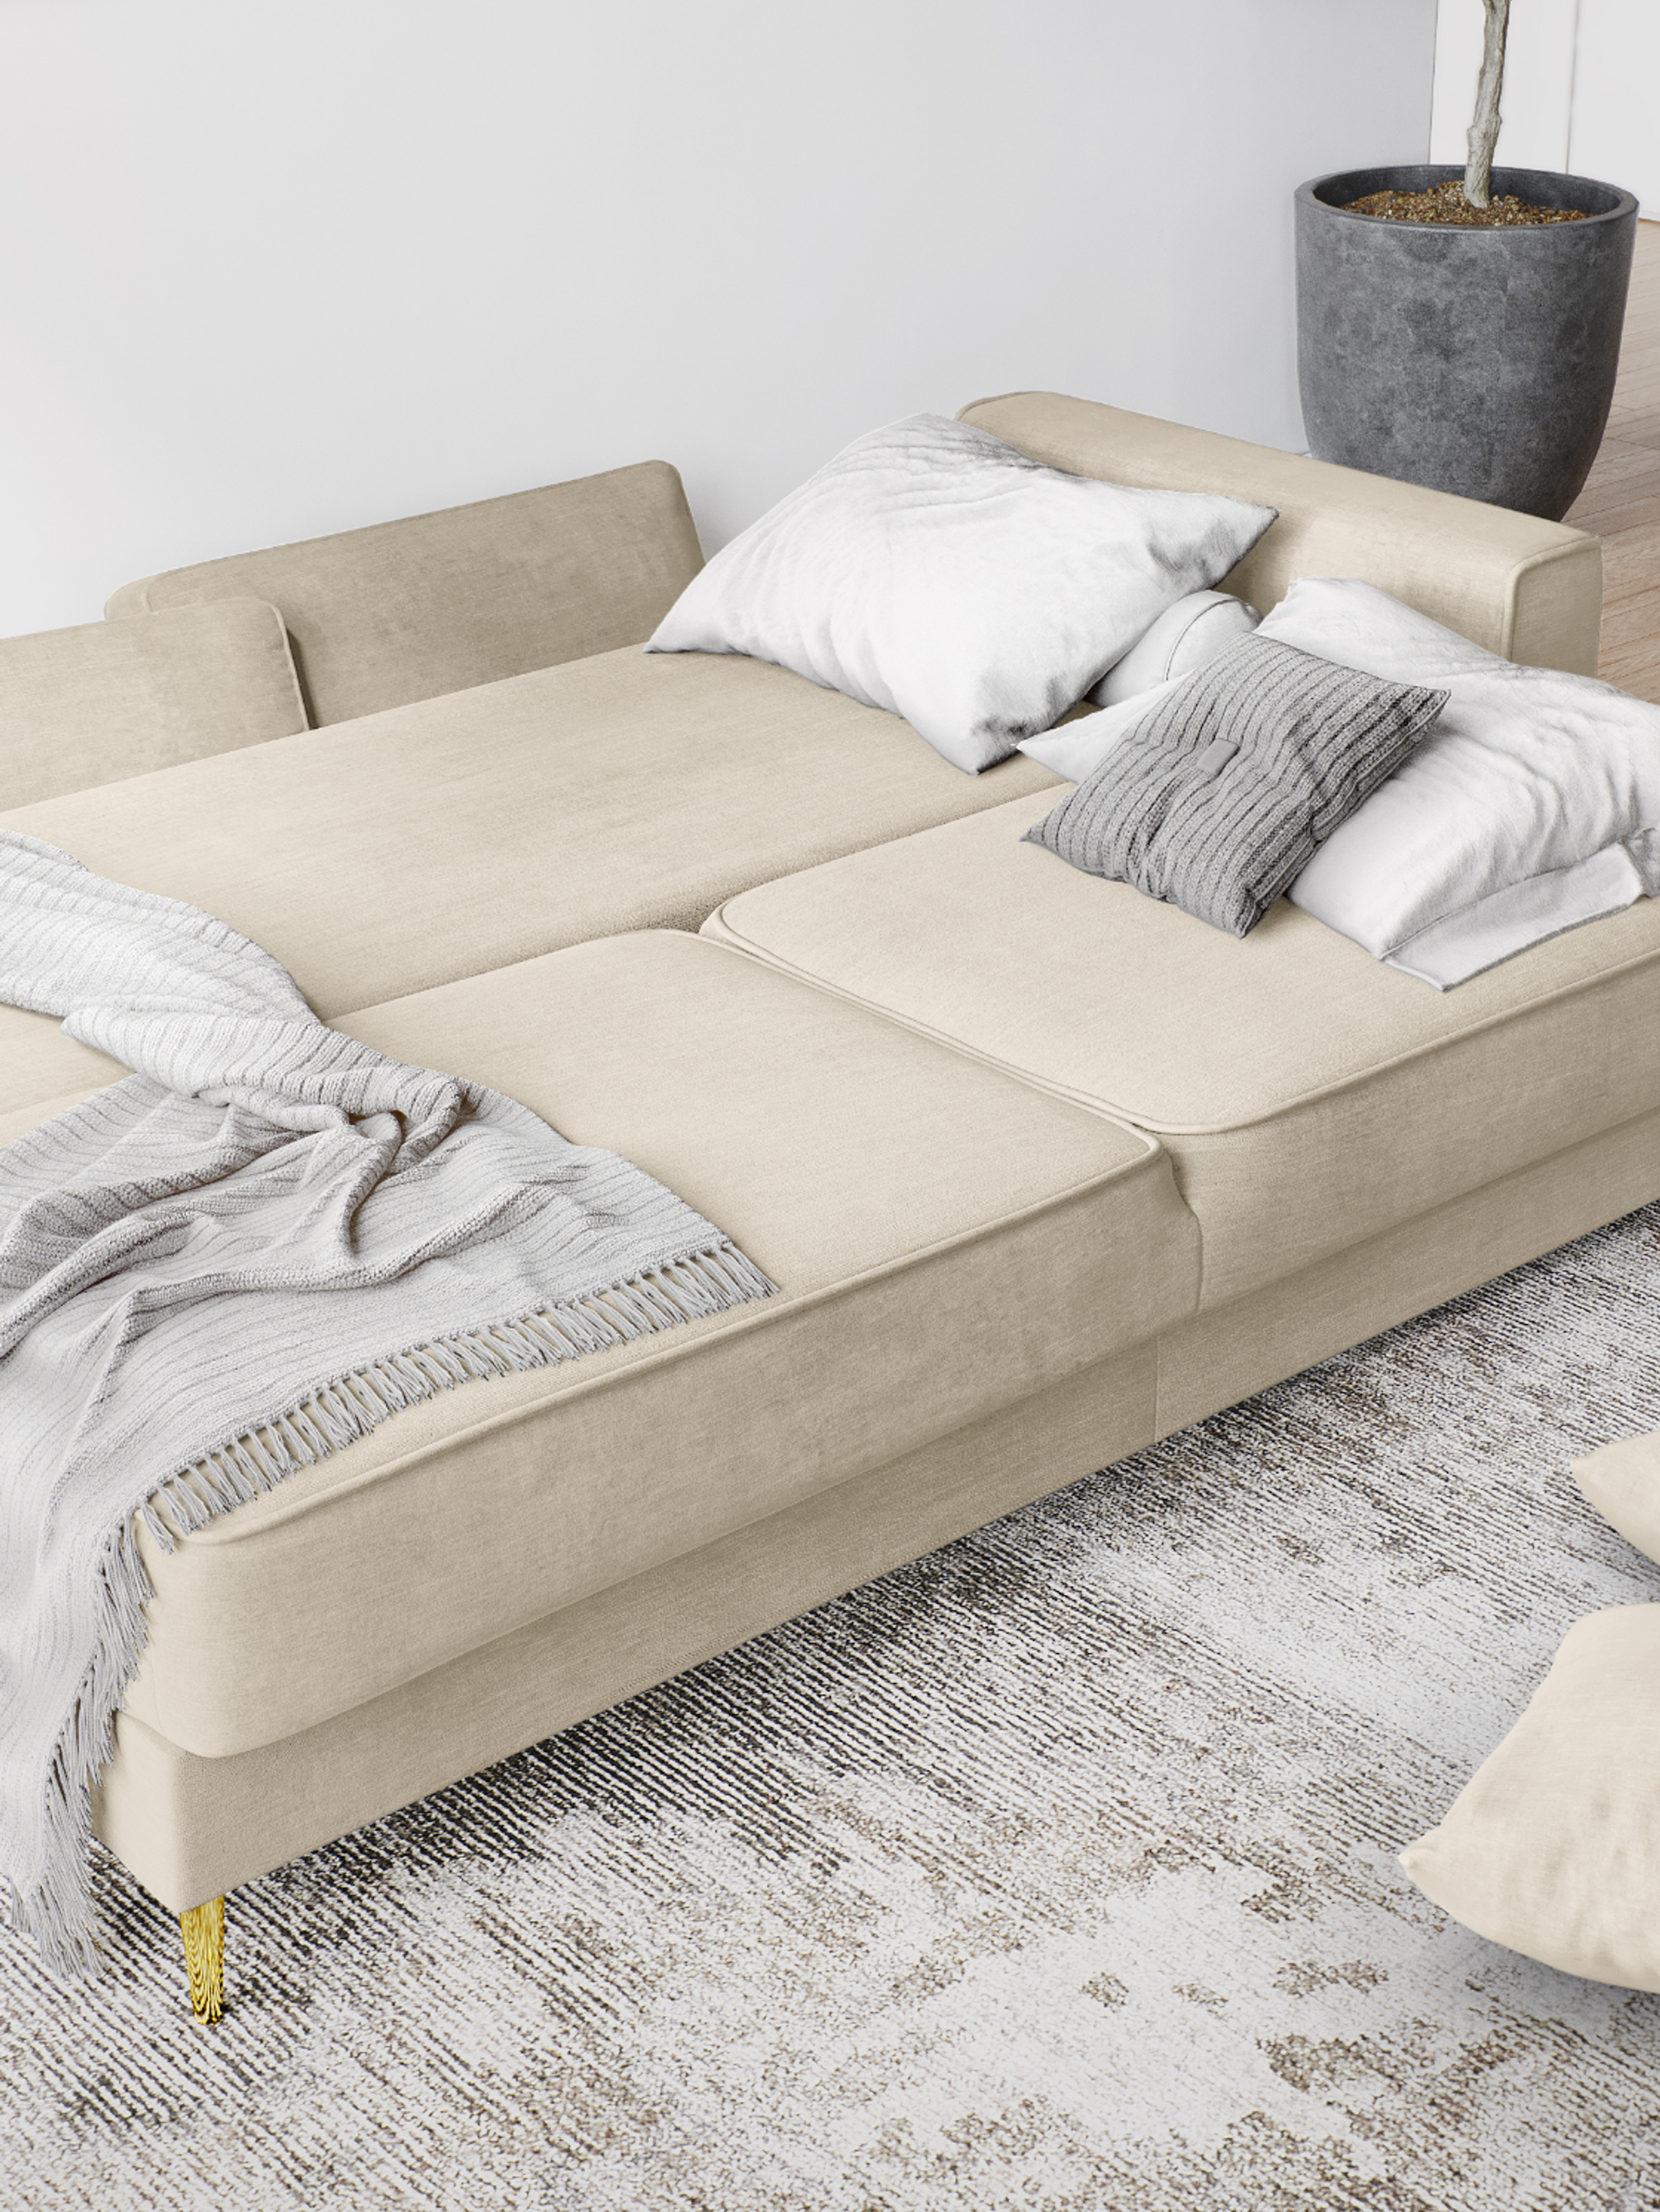 beige-sleeper-sofa-in-open-position-with-pillows-scattered